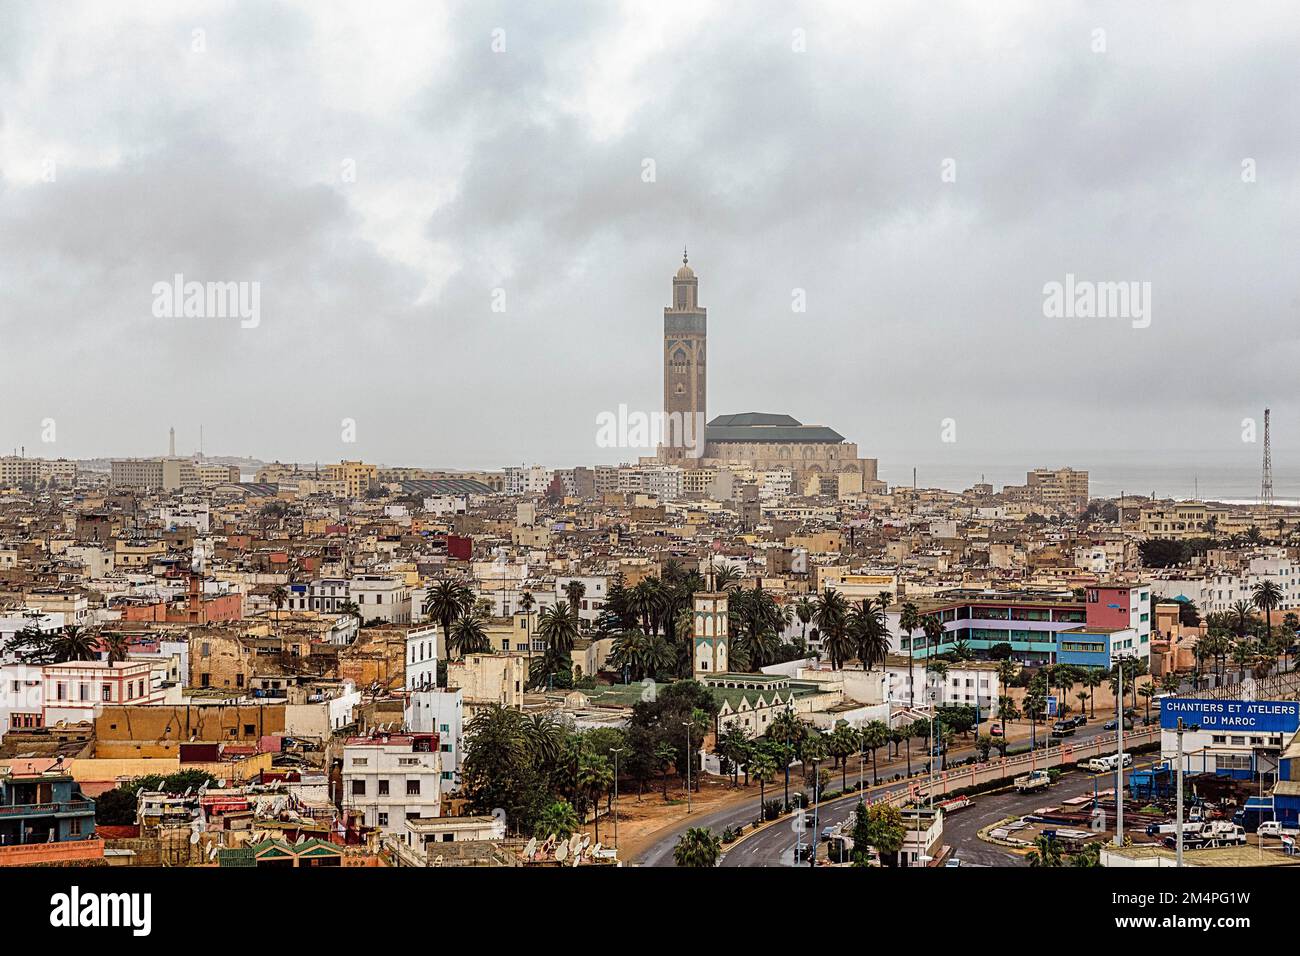 Casablanca skyline, panoramic view with Hassan II Mosque, landmark, dreary weather, view from above, Casablanca, Morocco Stock Photo